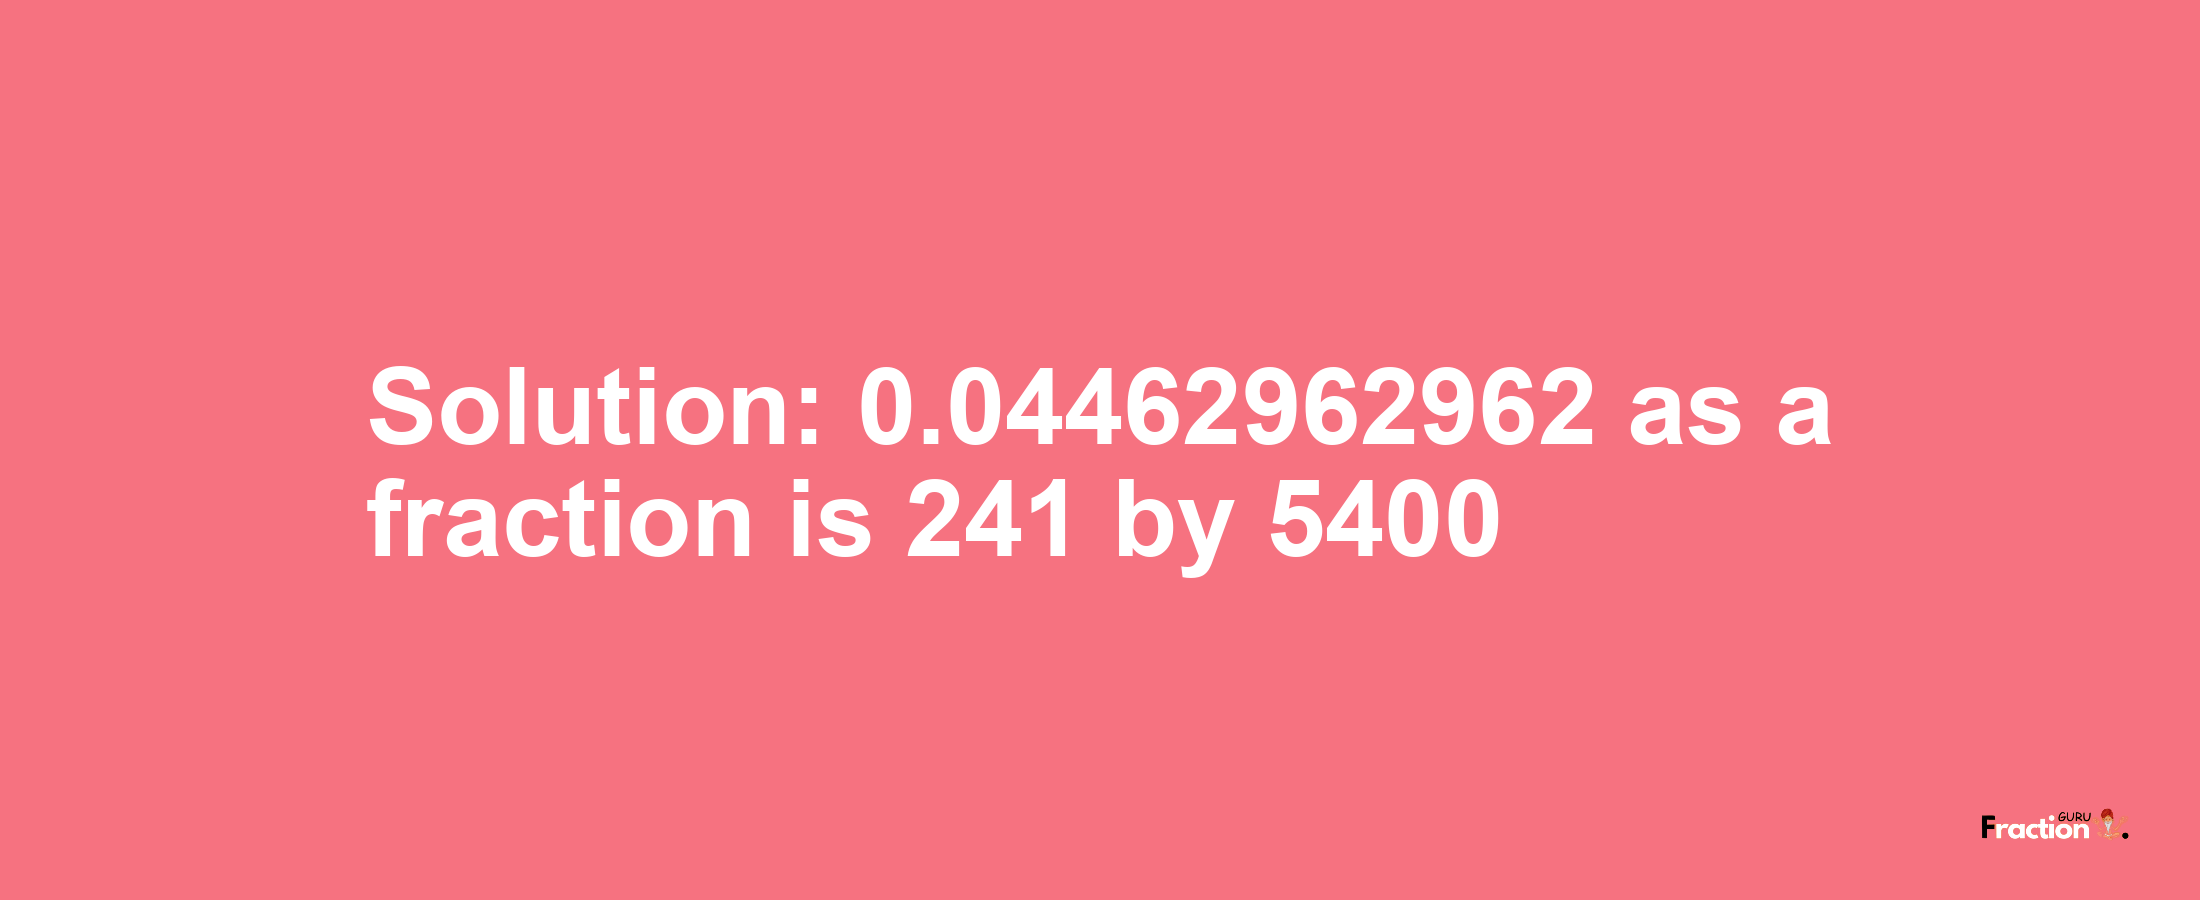 Solution:0.04462962962 as a fraction is 241/5400